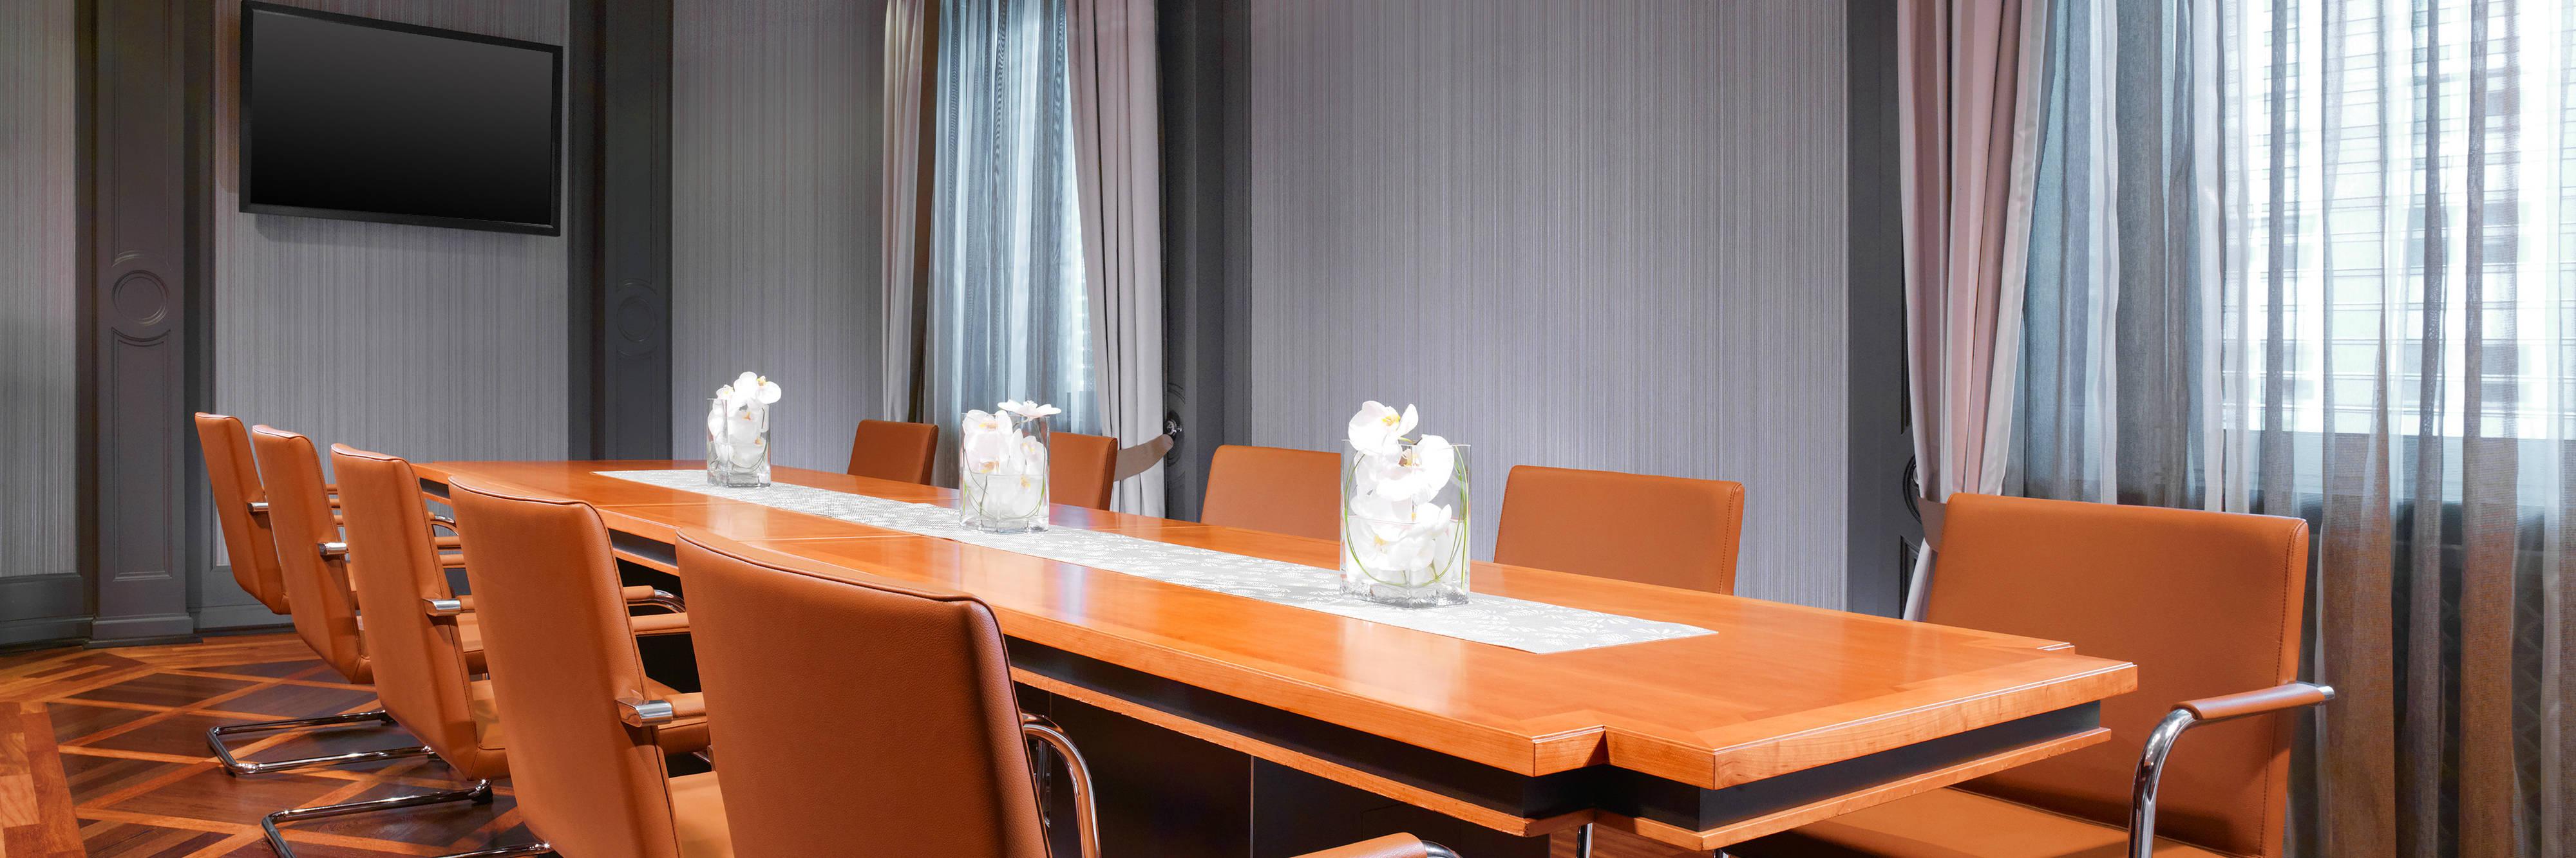 Boardroom with long table